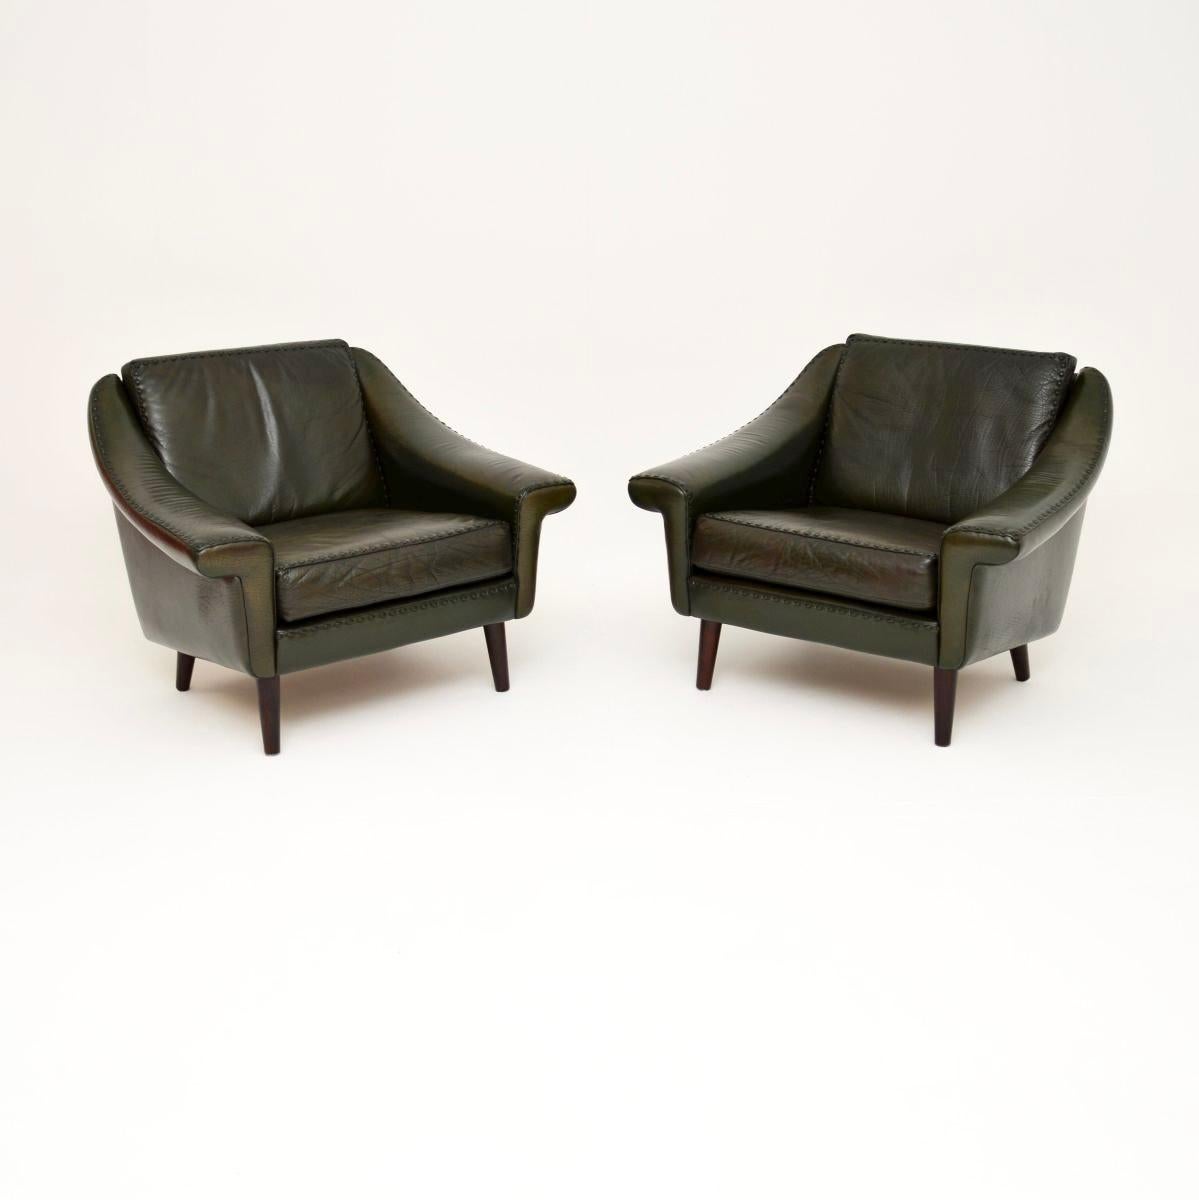 A wonderful pair of Danish vintage leather “Matador” armchairs by Aage Christiansen. They were made in Denmark and date from the 1960-70’s.

The quality is outstanding and they are extremely comfortable. The leather upholstery is thick and supple,